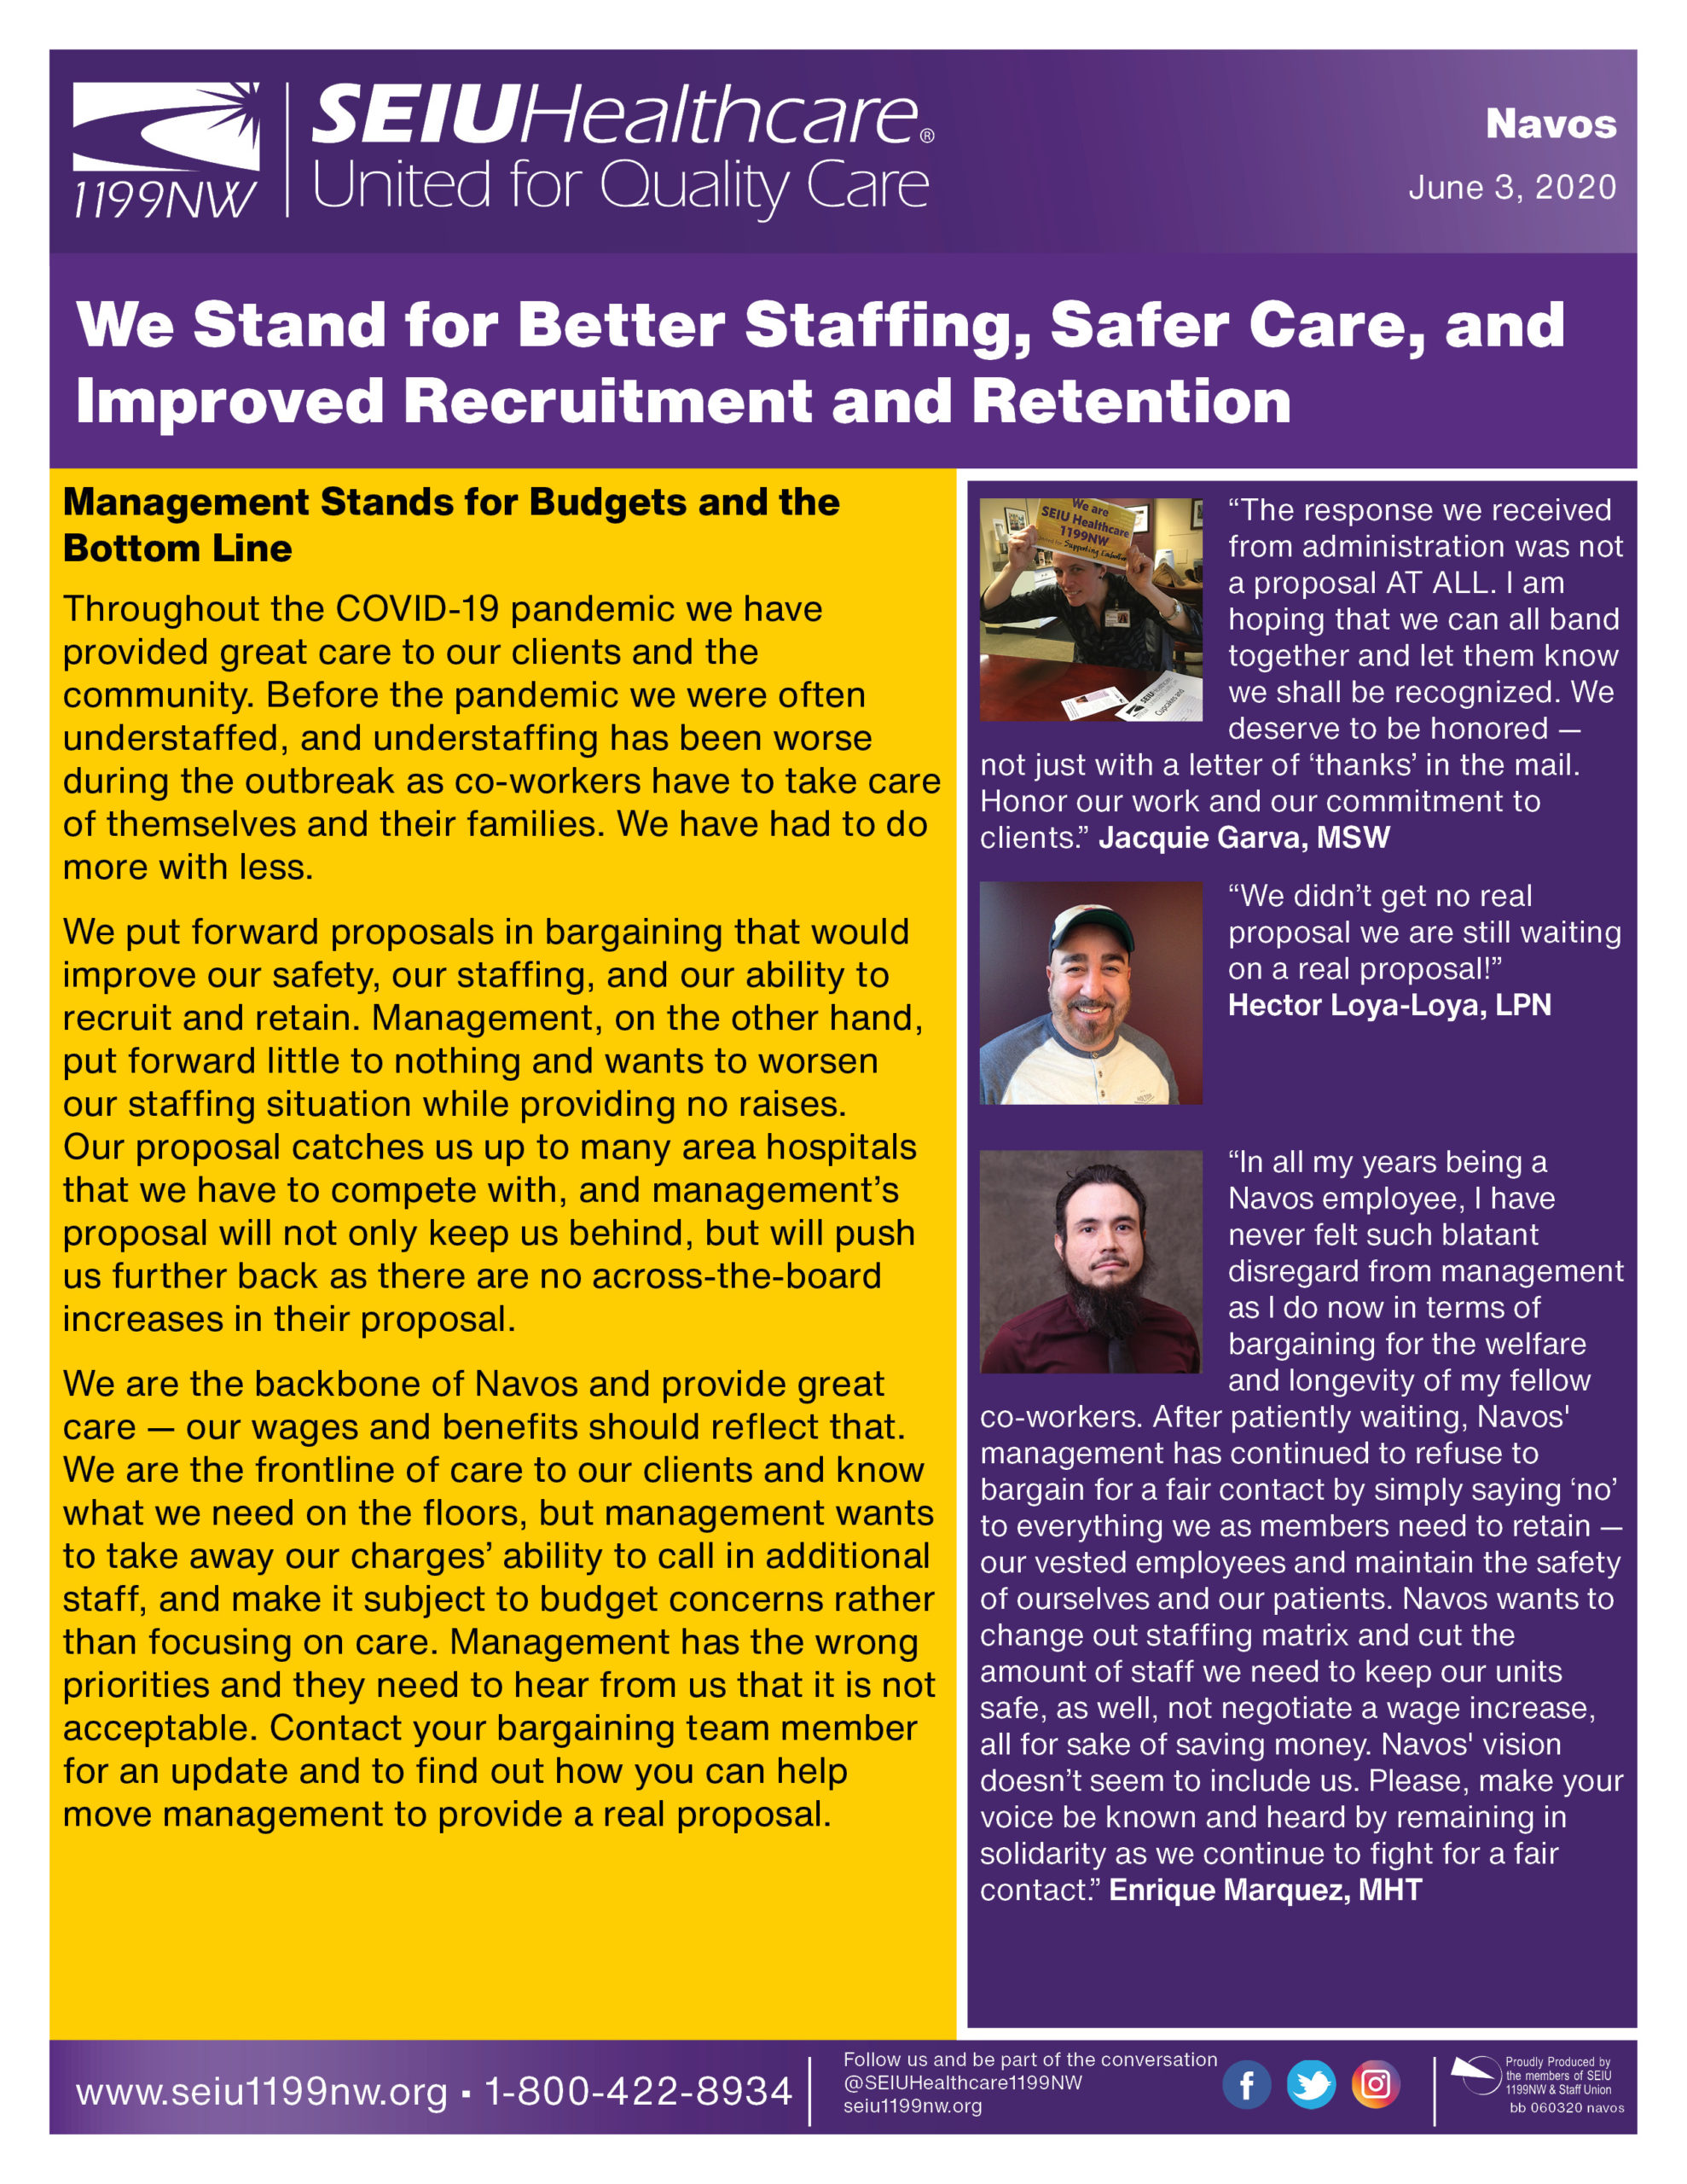 We Stand for Better Staffing, Safer Care, and Improved Recruitment and Retention